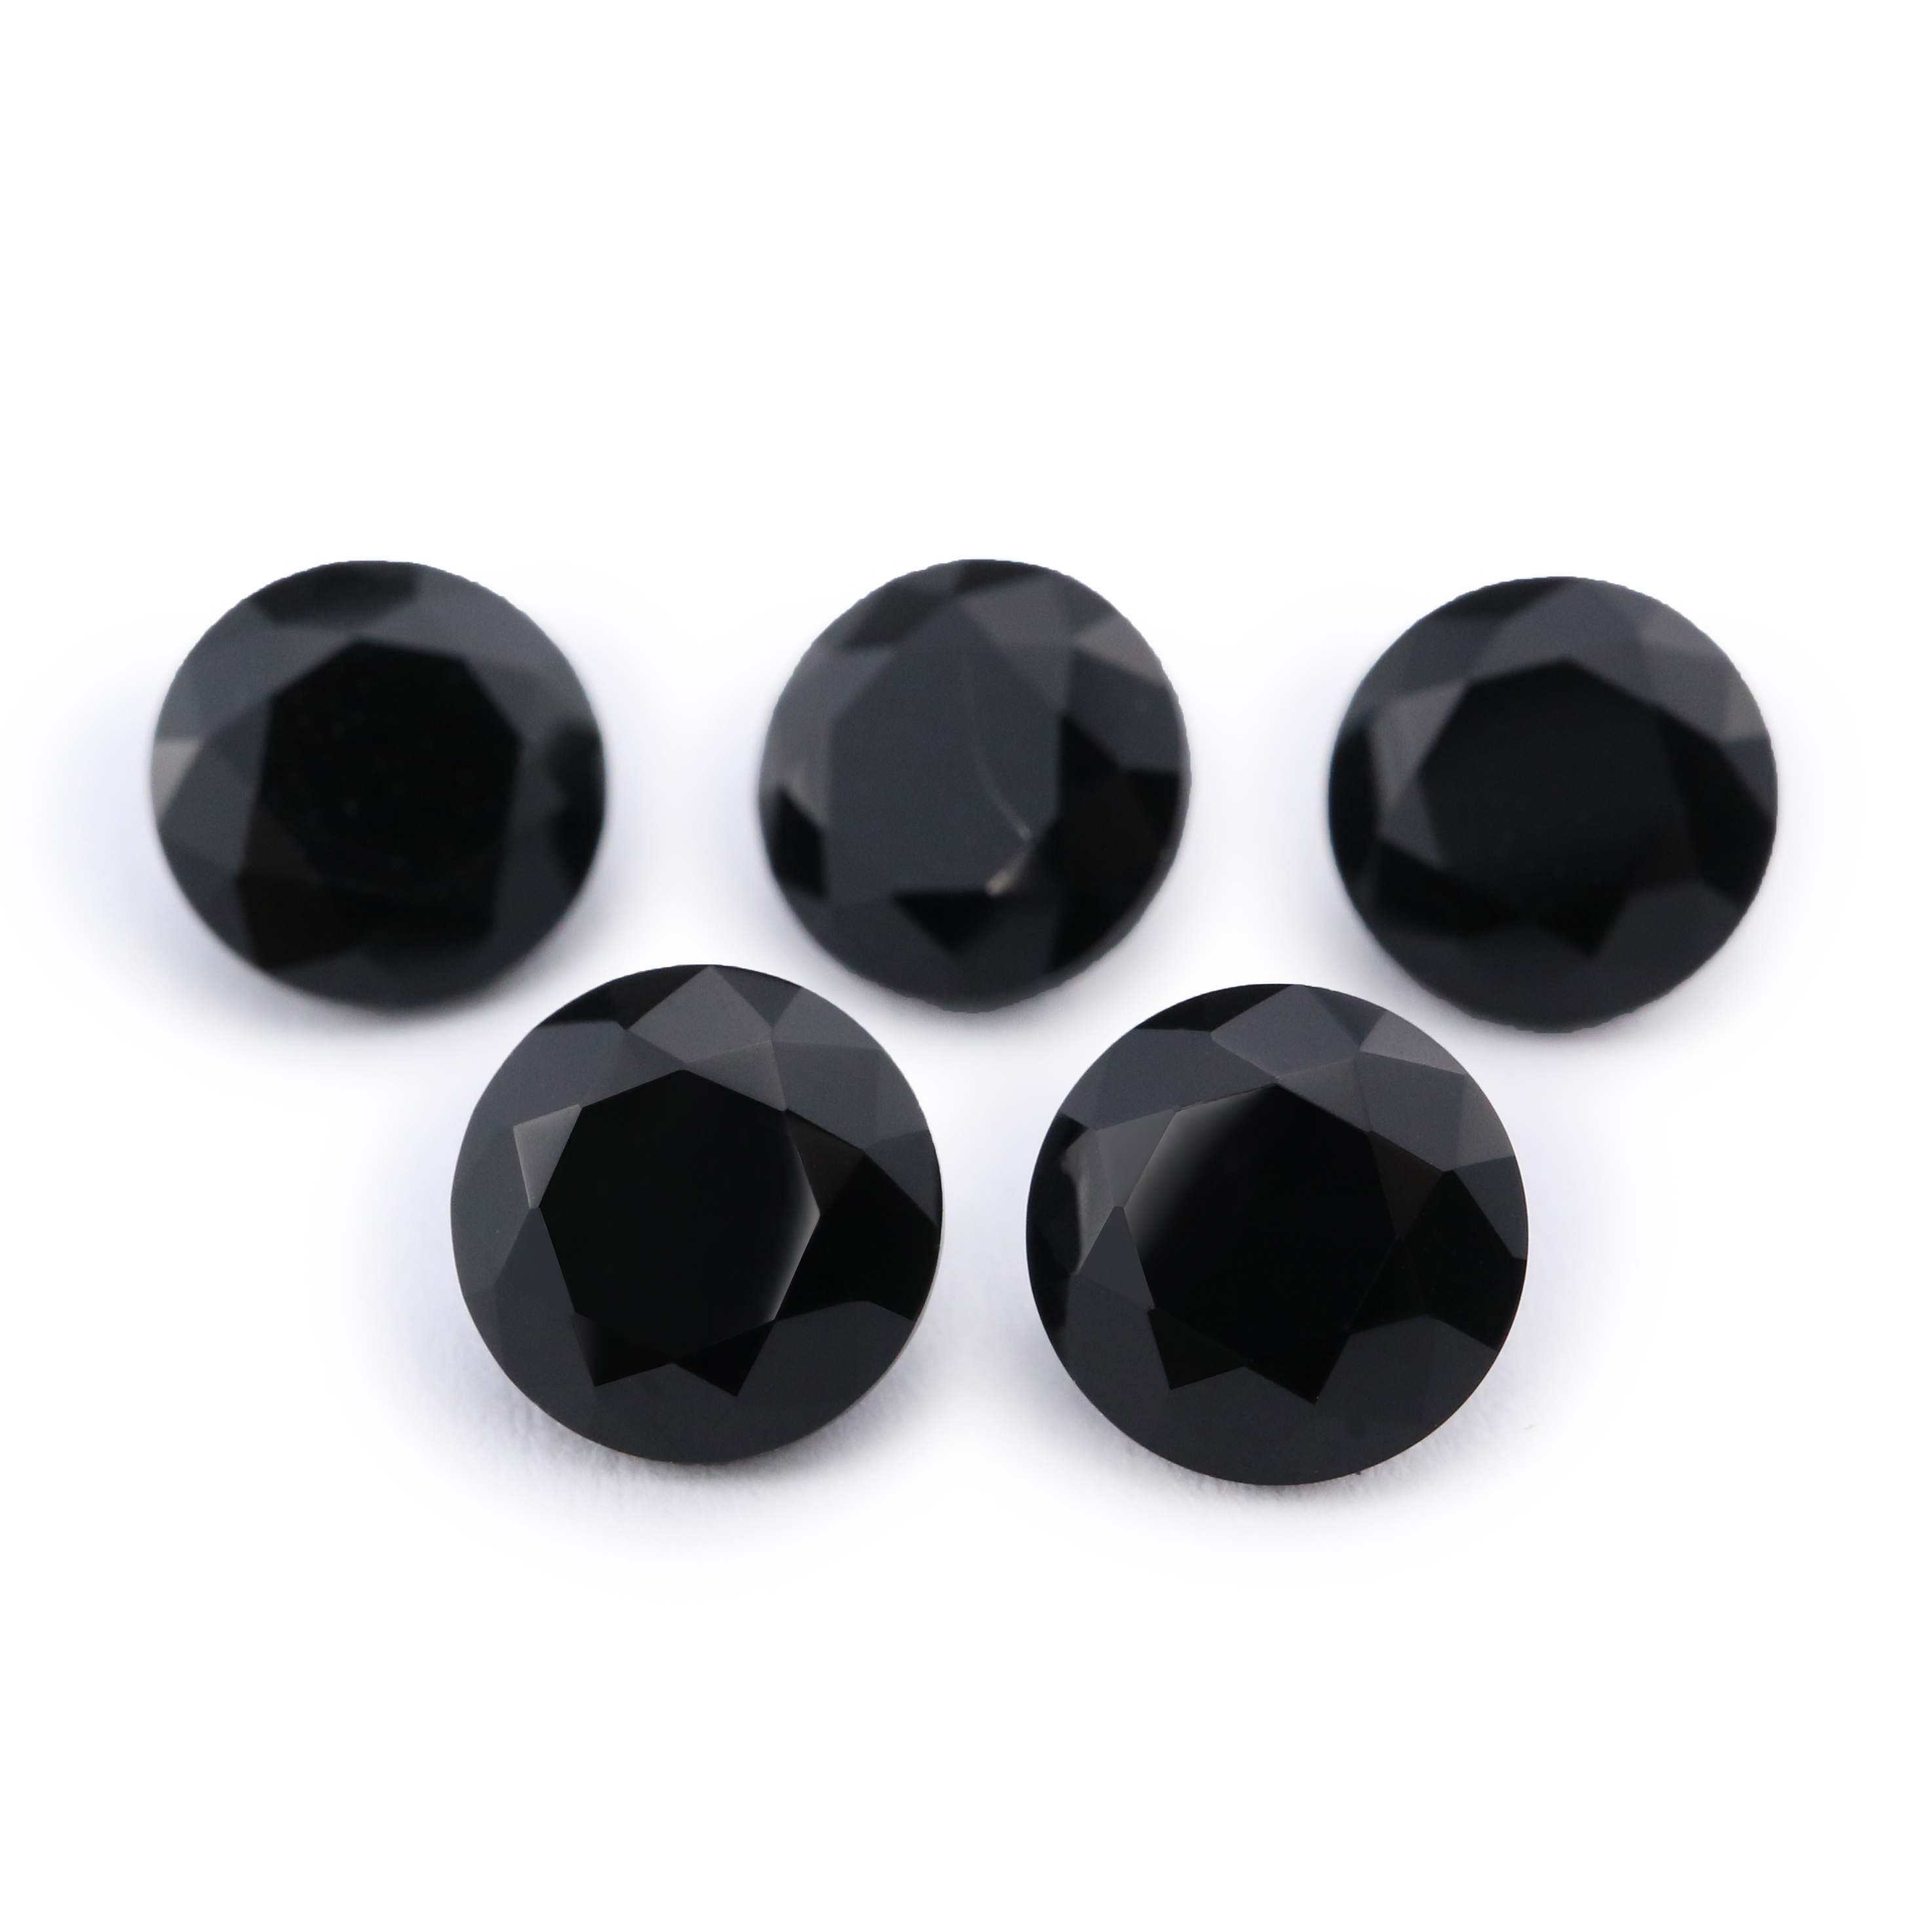 5Pcs Natural Round Black Onyx Faceted Cut Loose Gemstone Nature Semi Precious Stone DIY Jewelry Supplies 4110170 - Click Image to Close